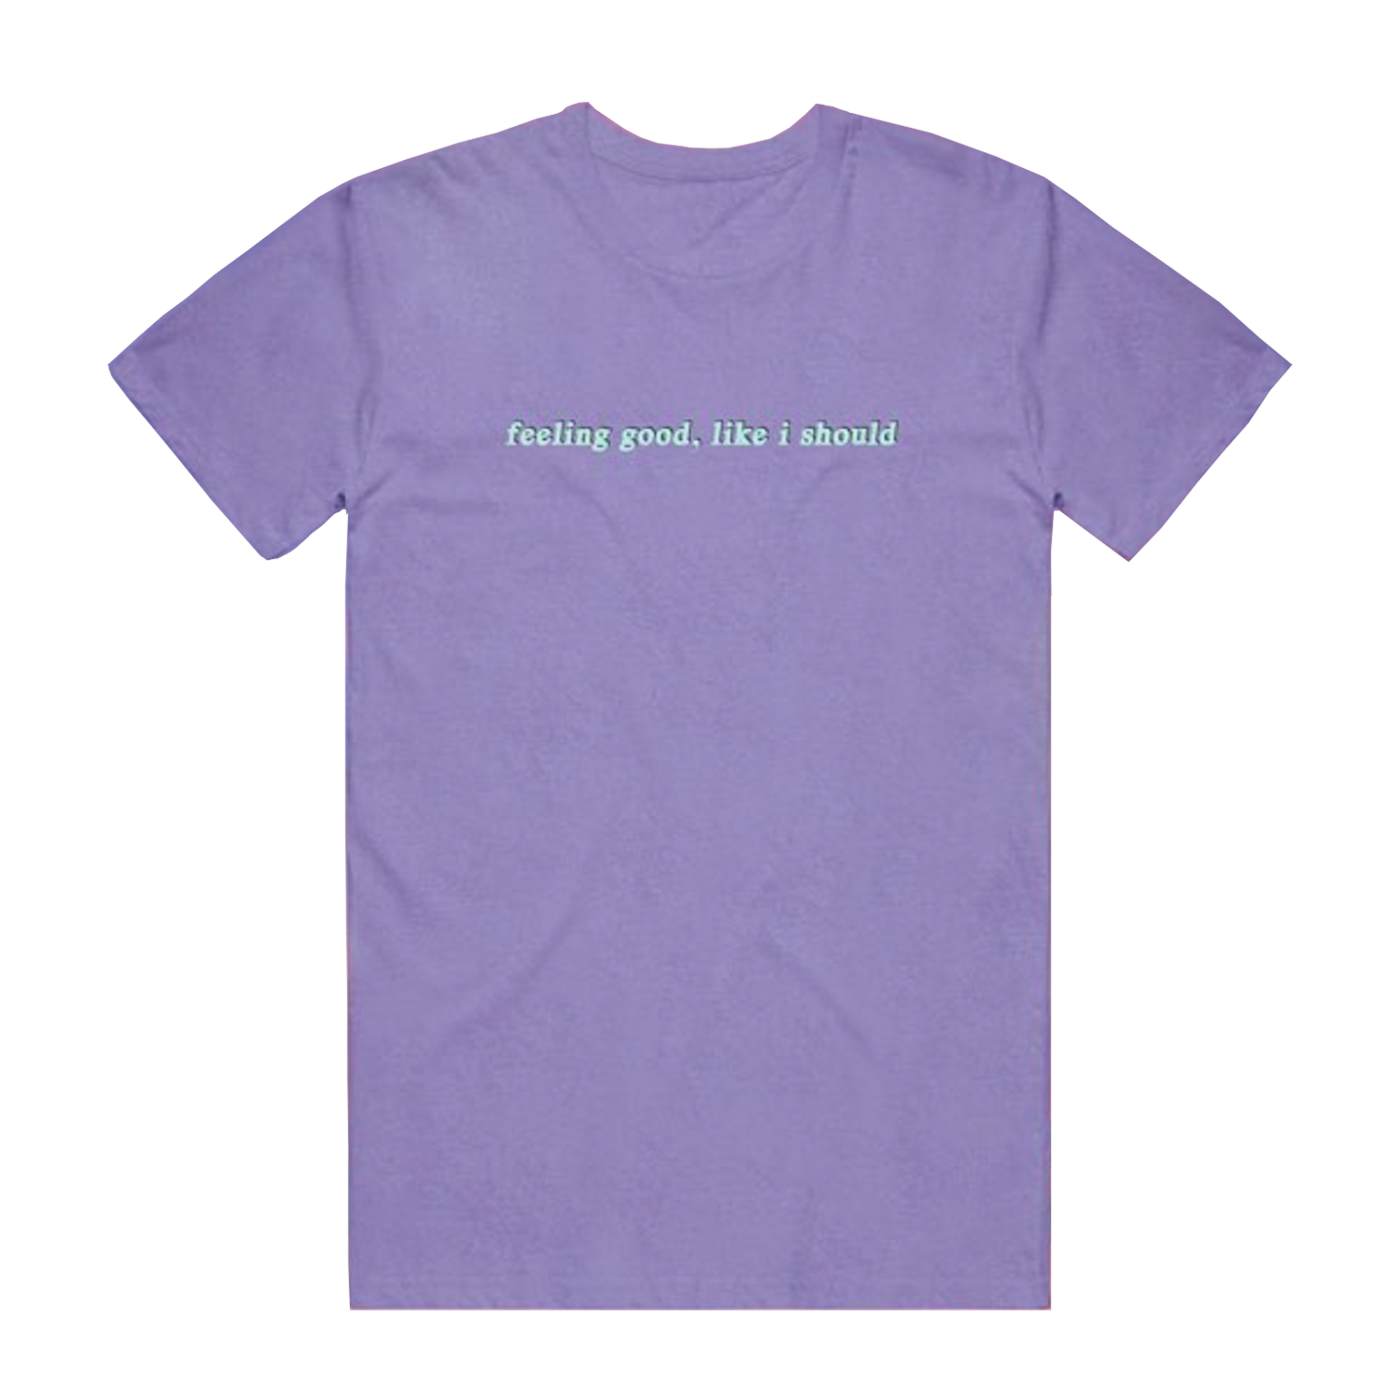 Surfaces Feeling Good Embroidered Tee - Violet